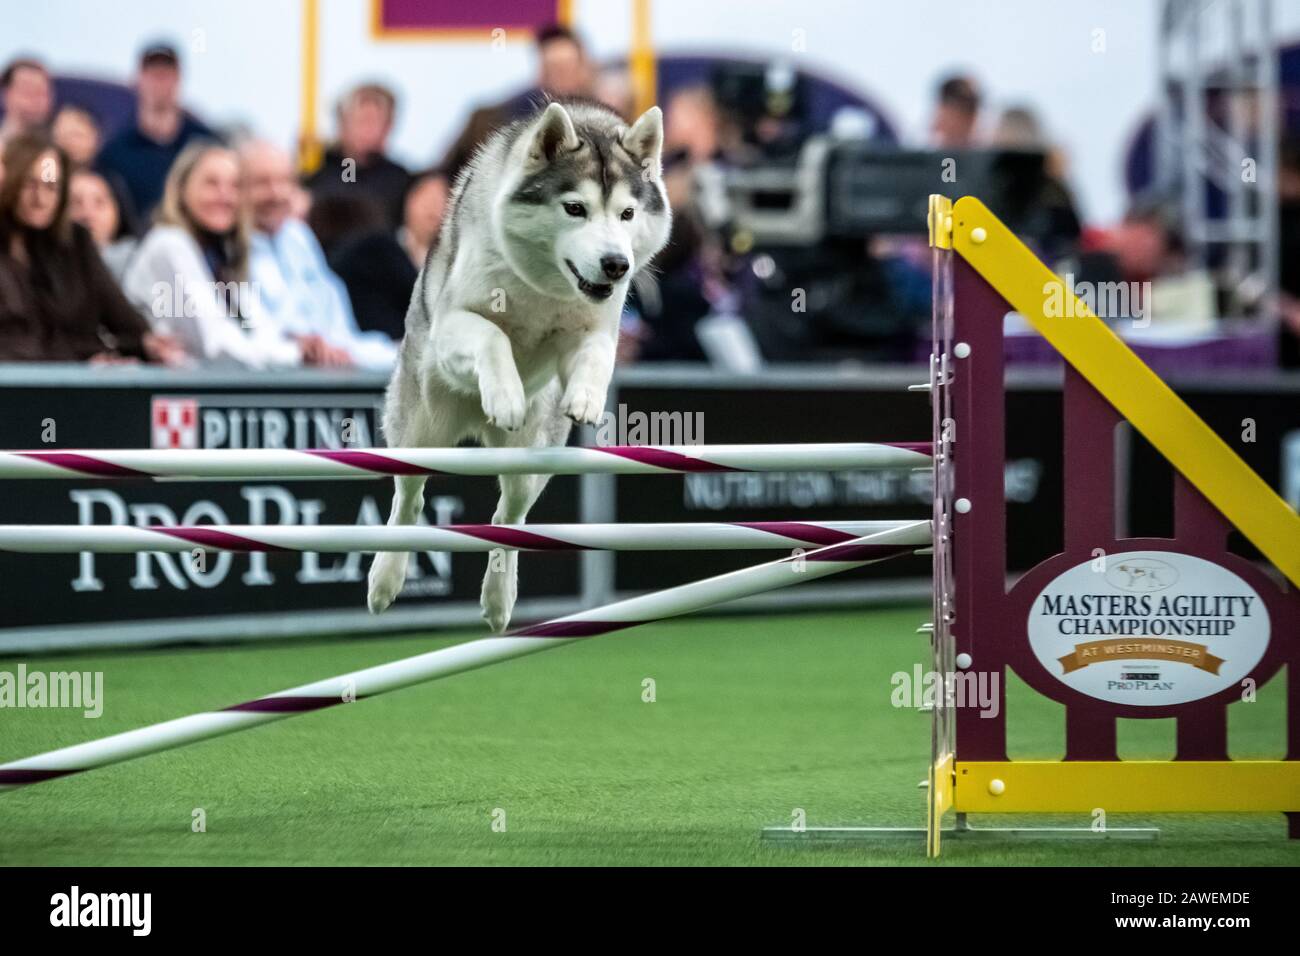 New York, USA. 8th Feb, 2020. Gloria, a Siberian Husky, clears an obstacle during the qualifying round of The Westminster Kennel Club Dog show Masters Agility Championship in New York city. Credit: Enrique Shore/Alamy Live News Stock Photo